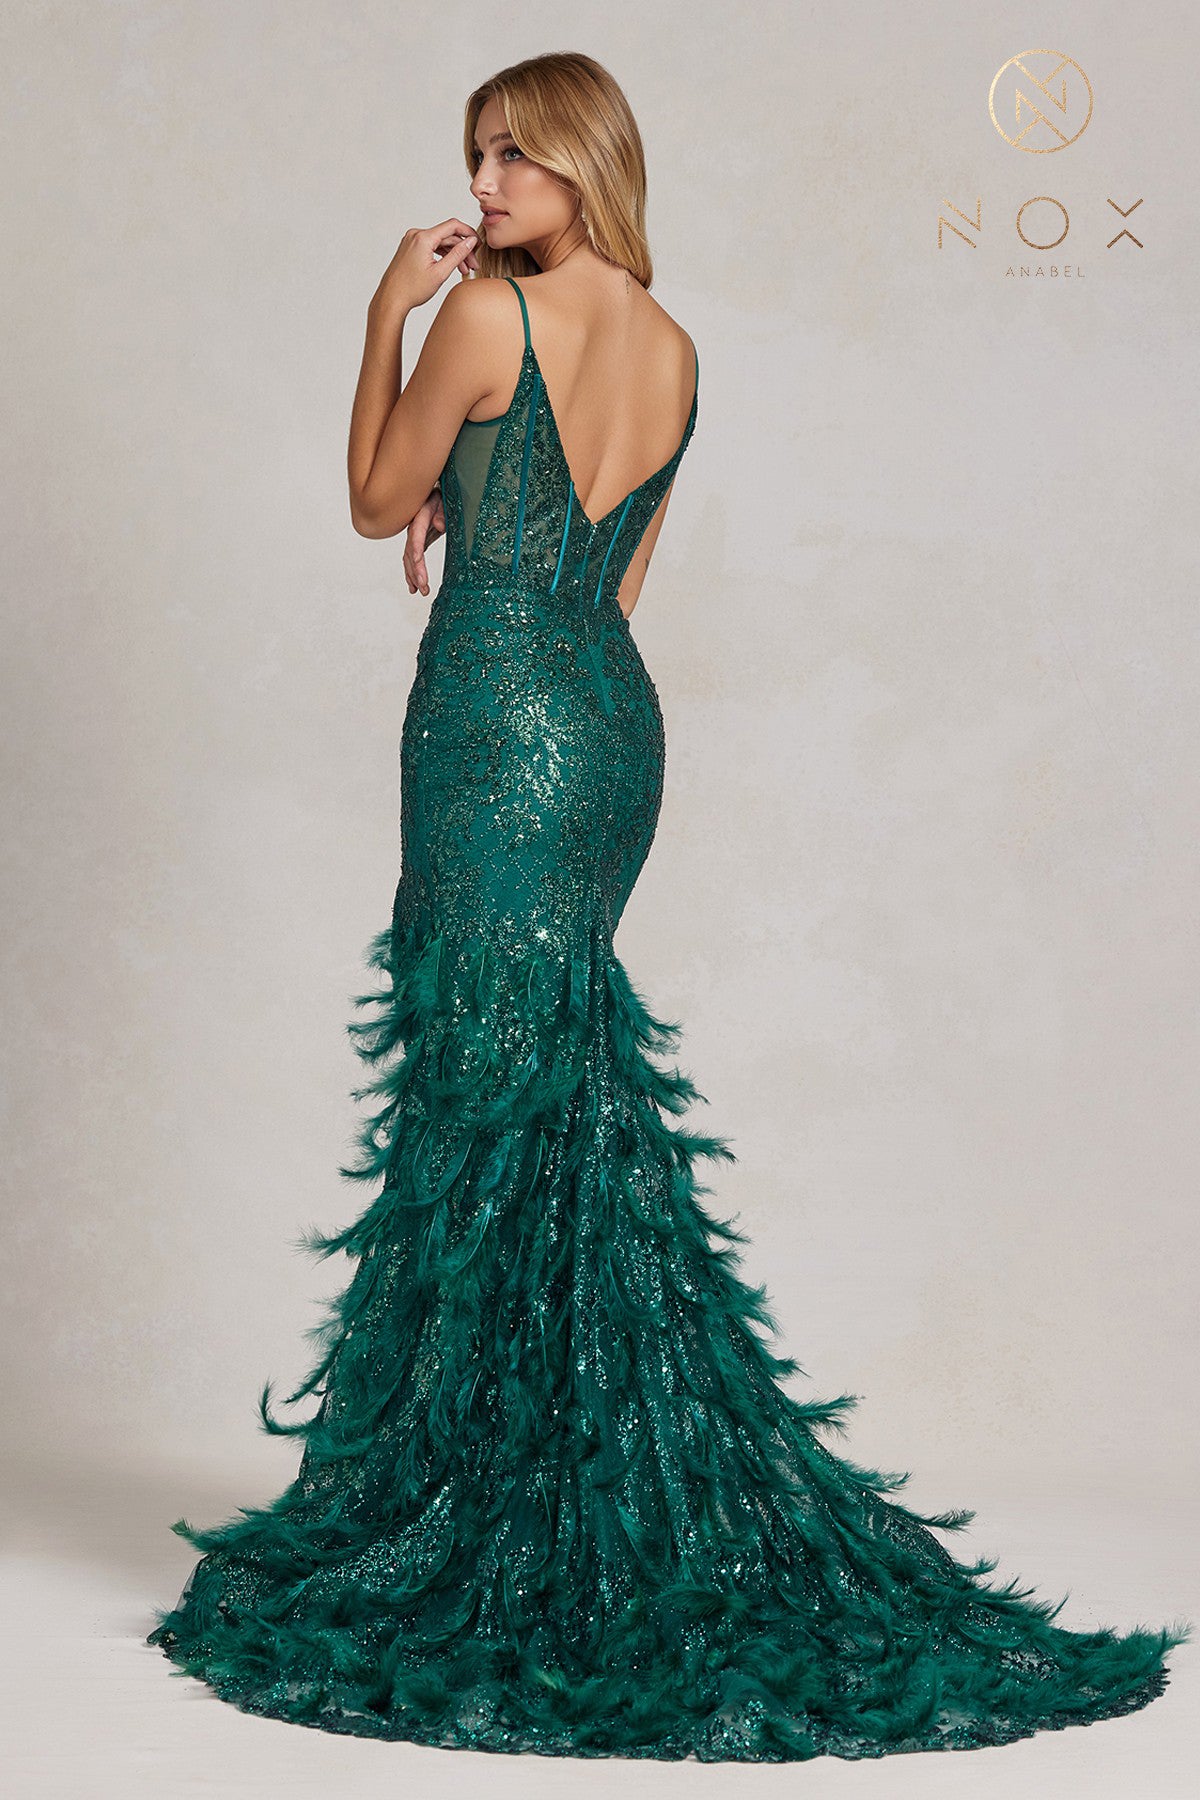 Nox Anabel C1119 Long Sheer Fitted Corset bodice with a v neckline Feather & Sequin embellished Mermaid skirt with a slit Prom Dress Pageant Gown.  Sizes: 00-16  Colors: Black, Emerald, Fuchsia, Royal Blue, Red